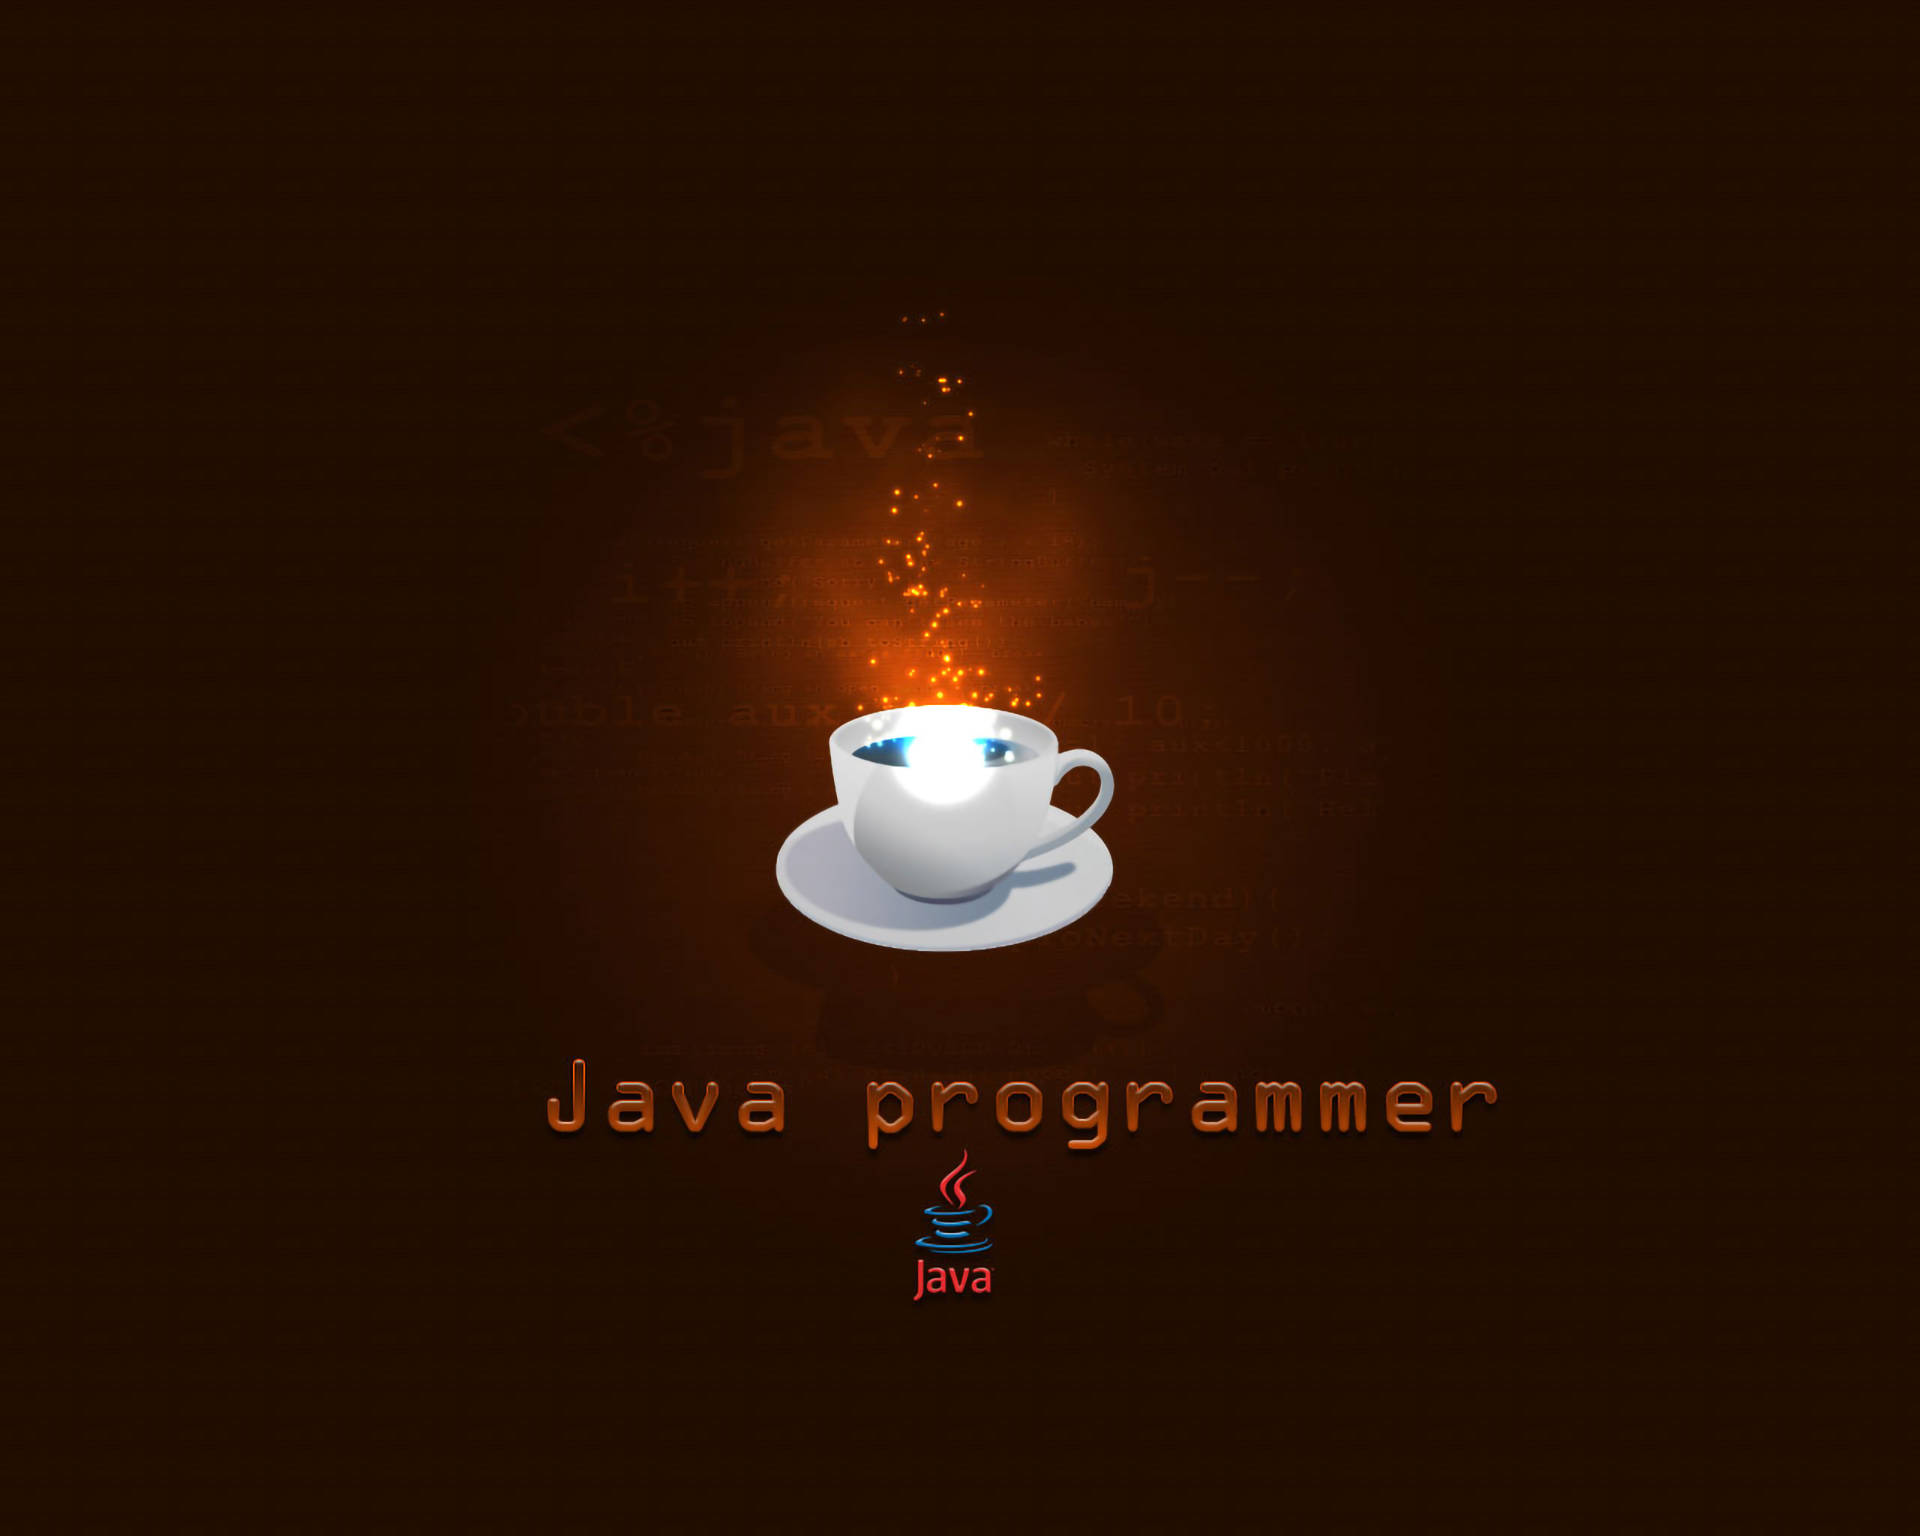 Java Programming With Glowing Cup